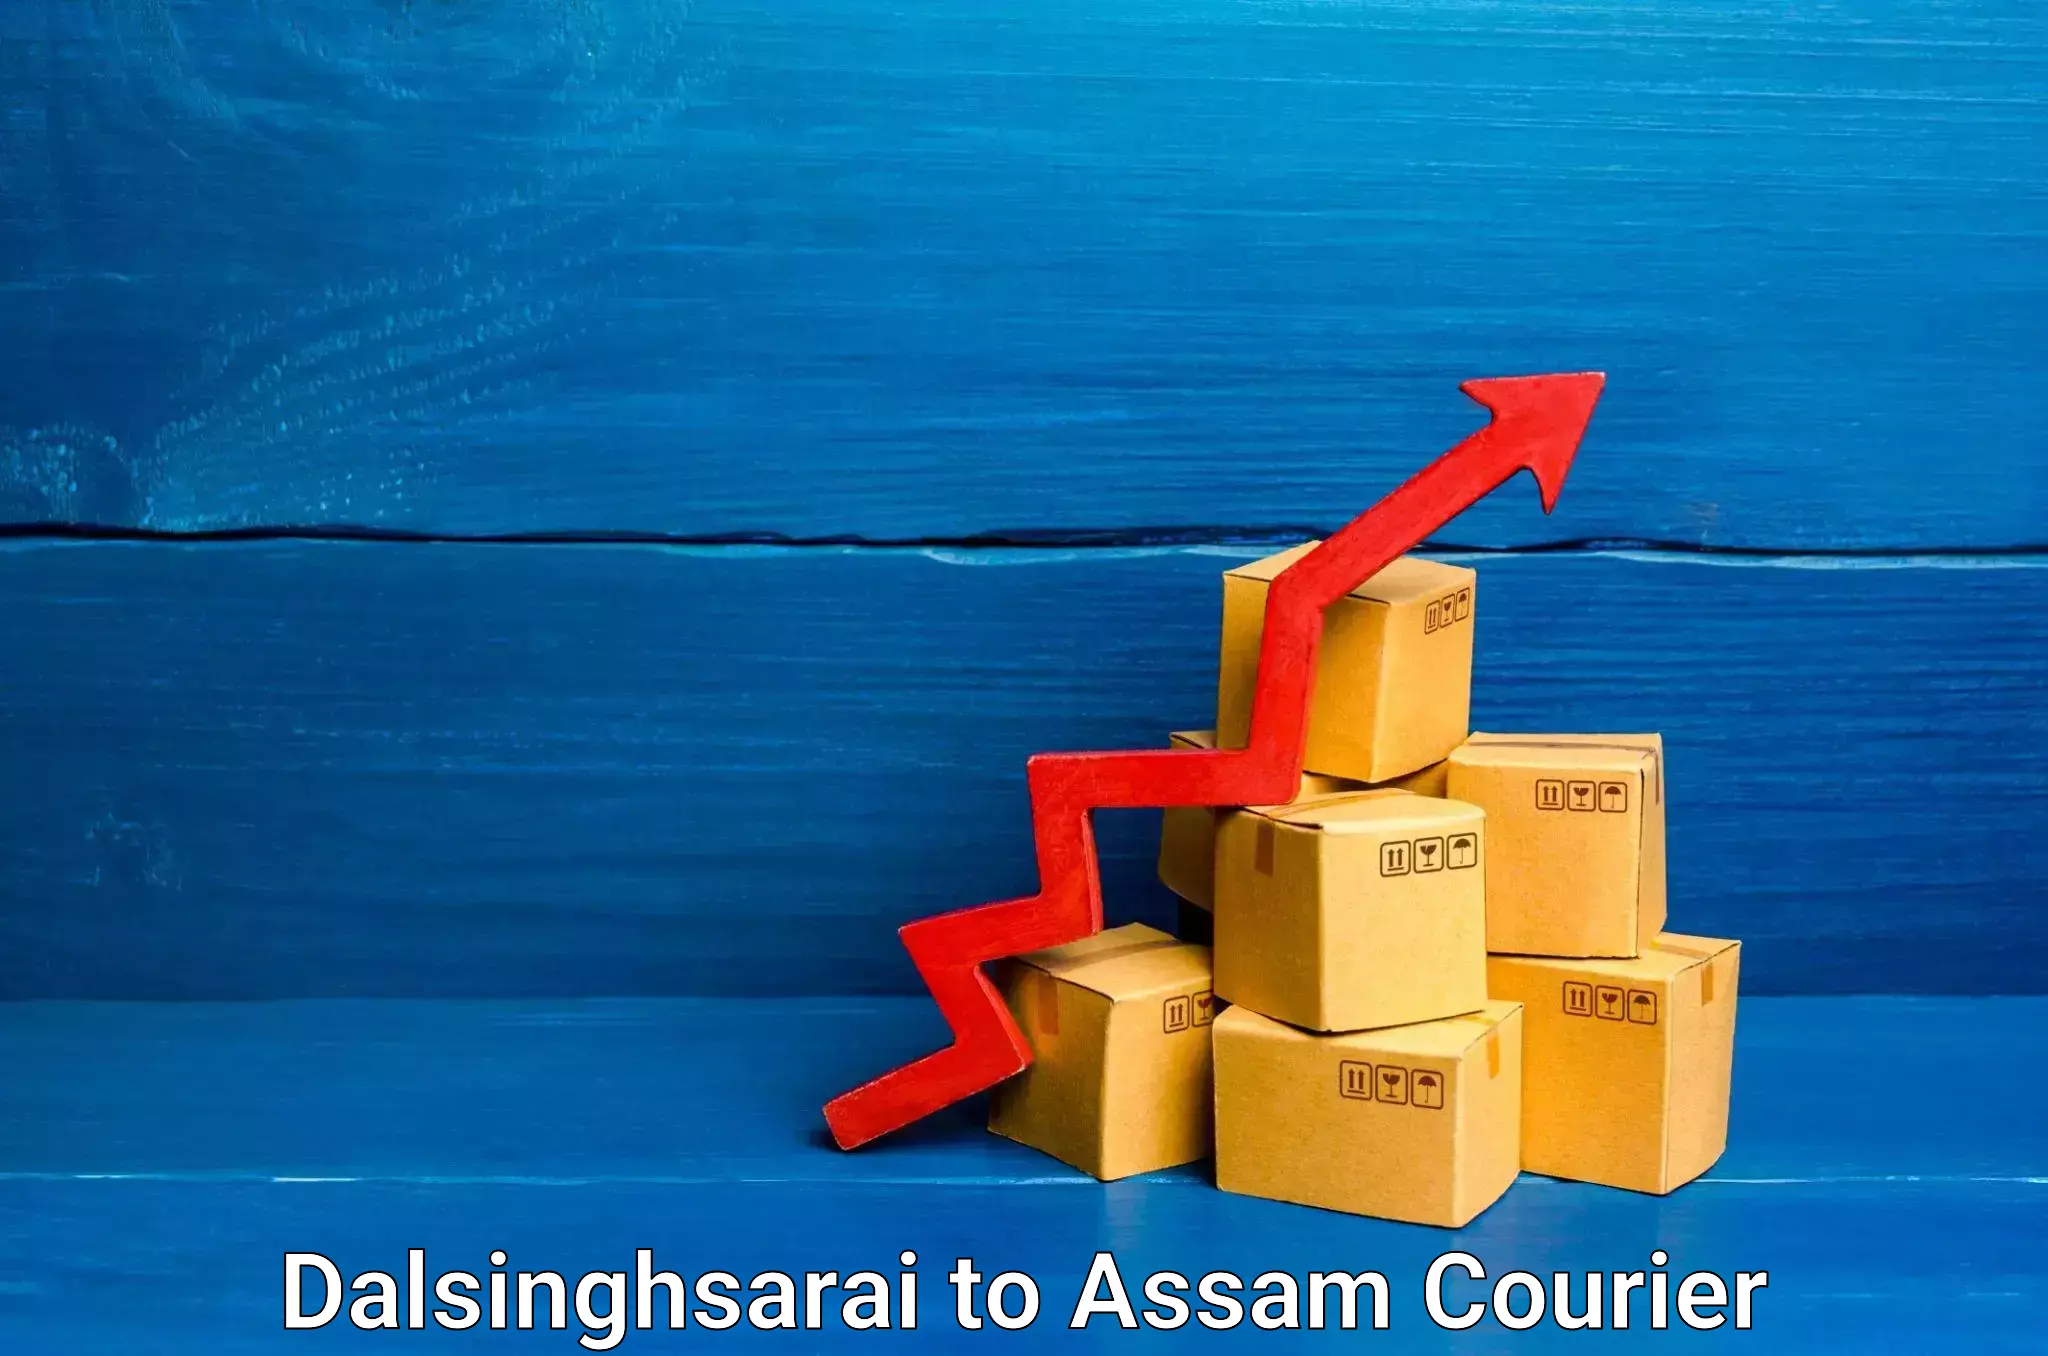 Home moving experts Dalsinghsarai to Silchar